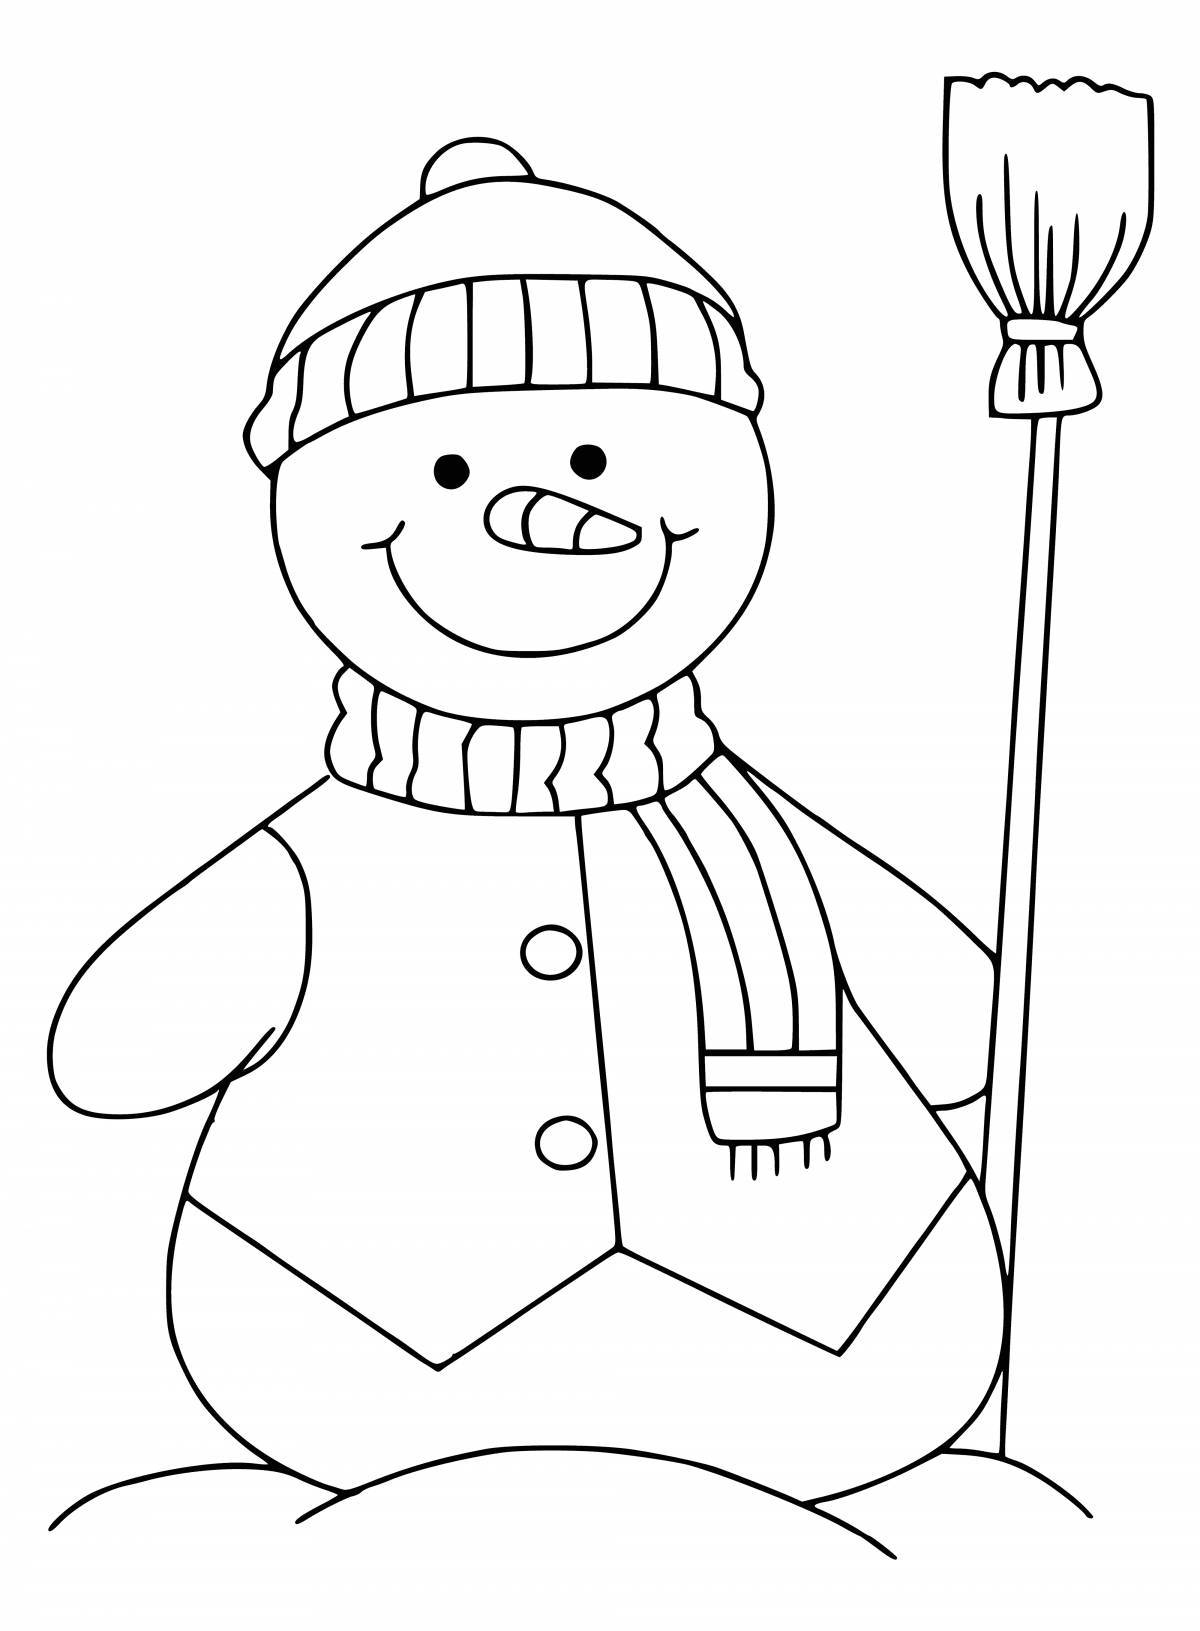 Cute snowman coloring for kids